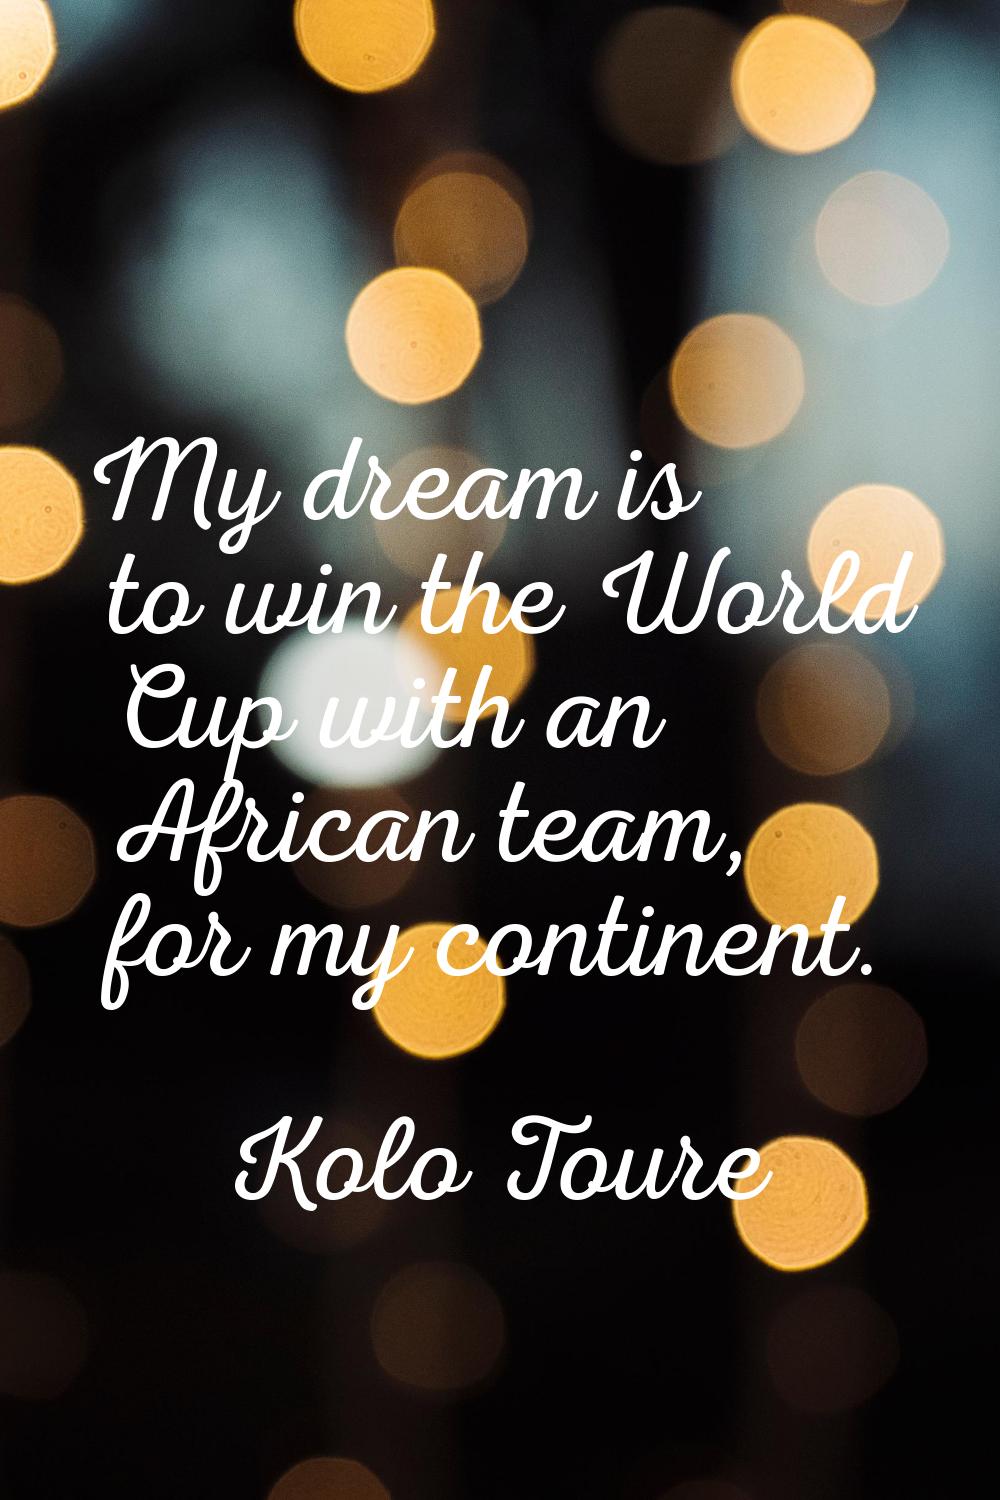 My dream is to win the World Cup with an African team, for my continent.